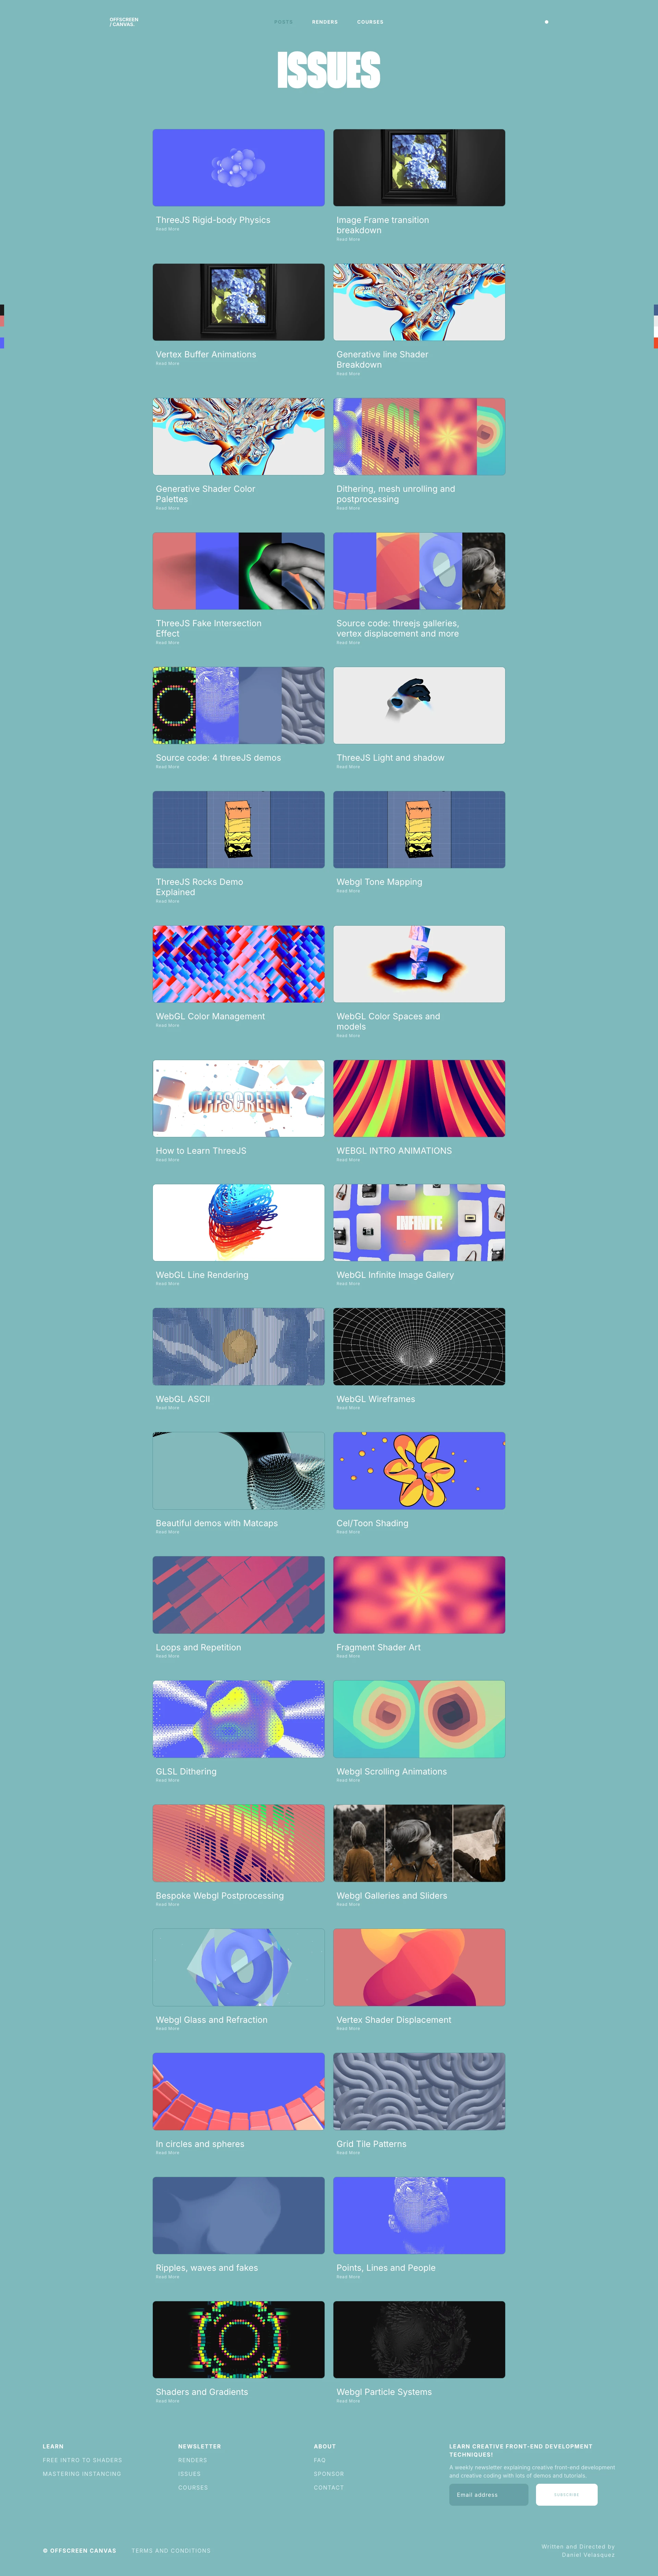 Offscreen Canvas Landing Page Example: Weekly webgl and creative coding newsletter. Techniques resources, inspiration and demos made by Daniel Velasquez!